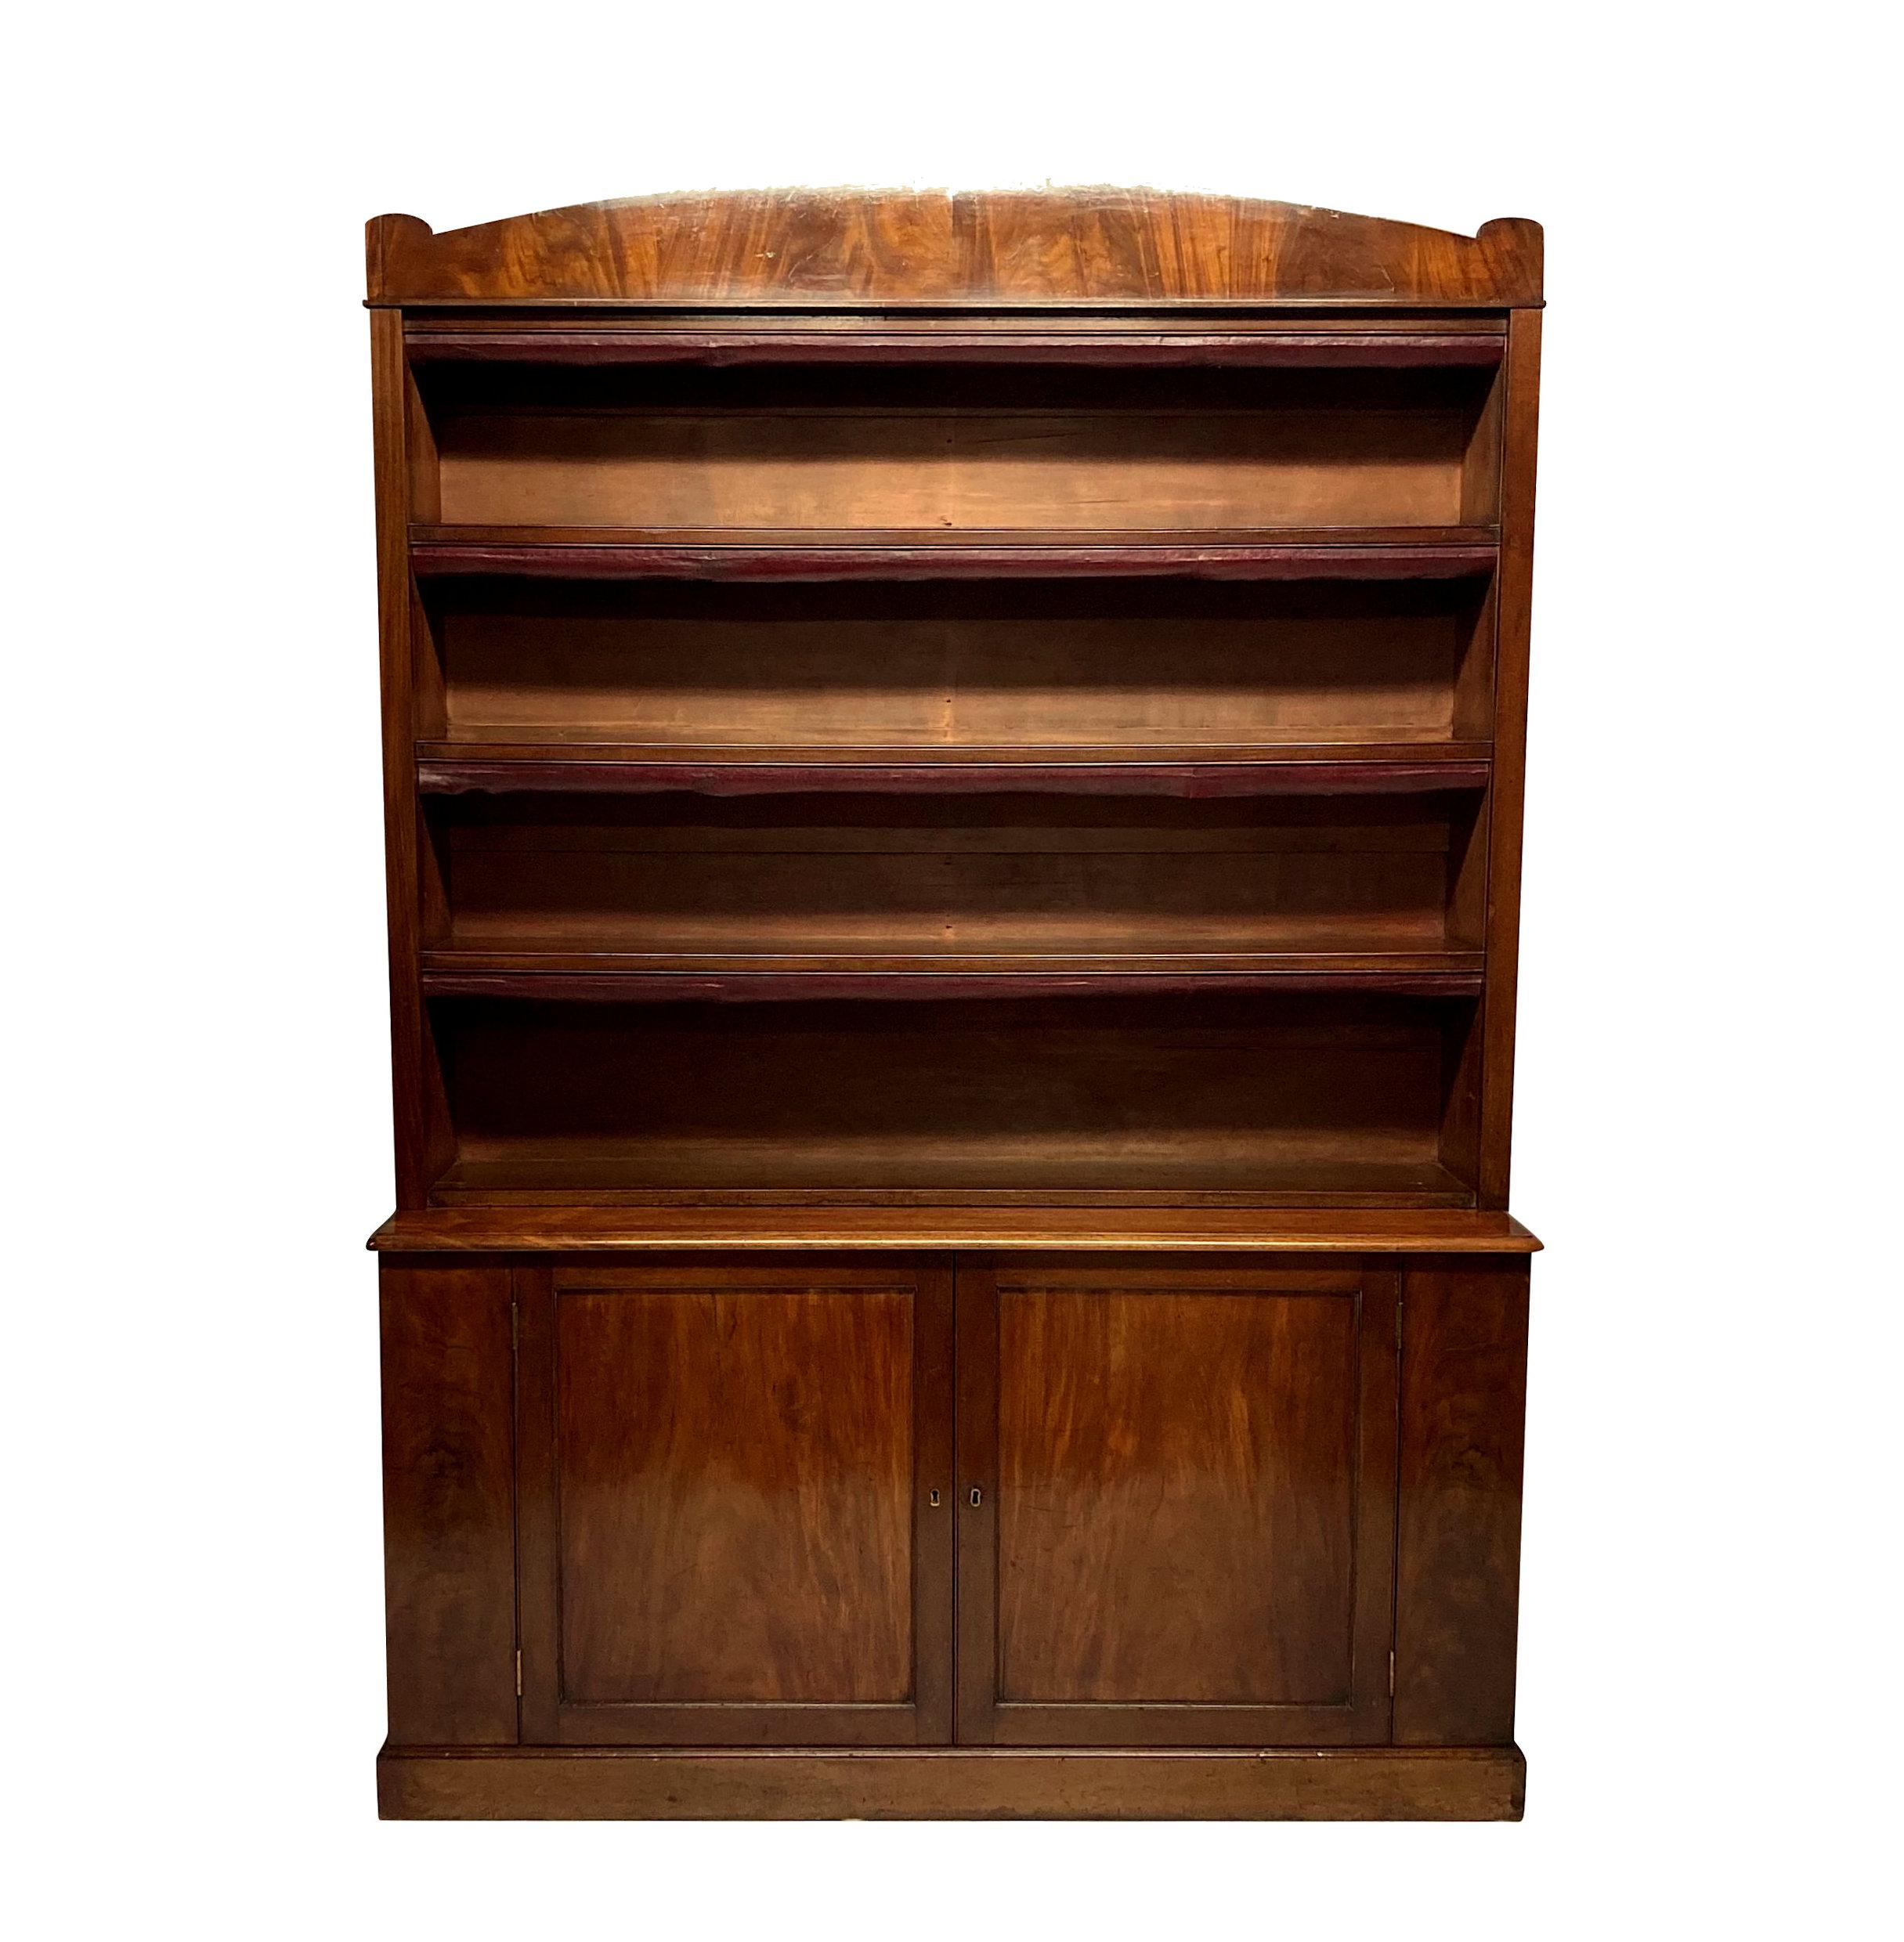 A pair of large English architectural mahogany bookcases, each with three fixed shelves with burgundy leather edging. The cupboards below, each with a single shelf and a restrained arched pediment reminiscent of Lutyens work.

Measure: 163 & 170cm